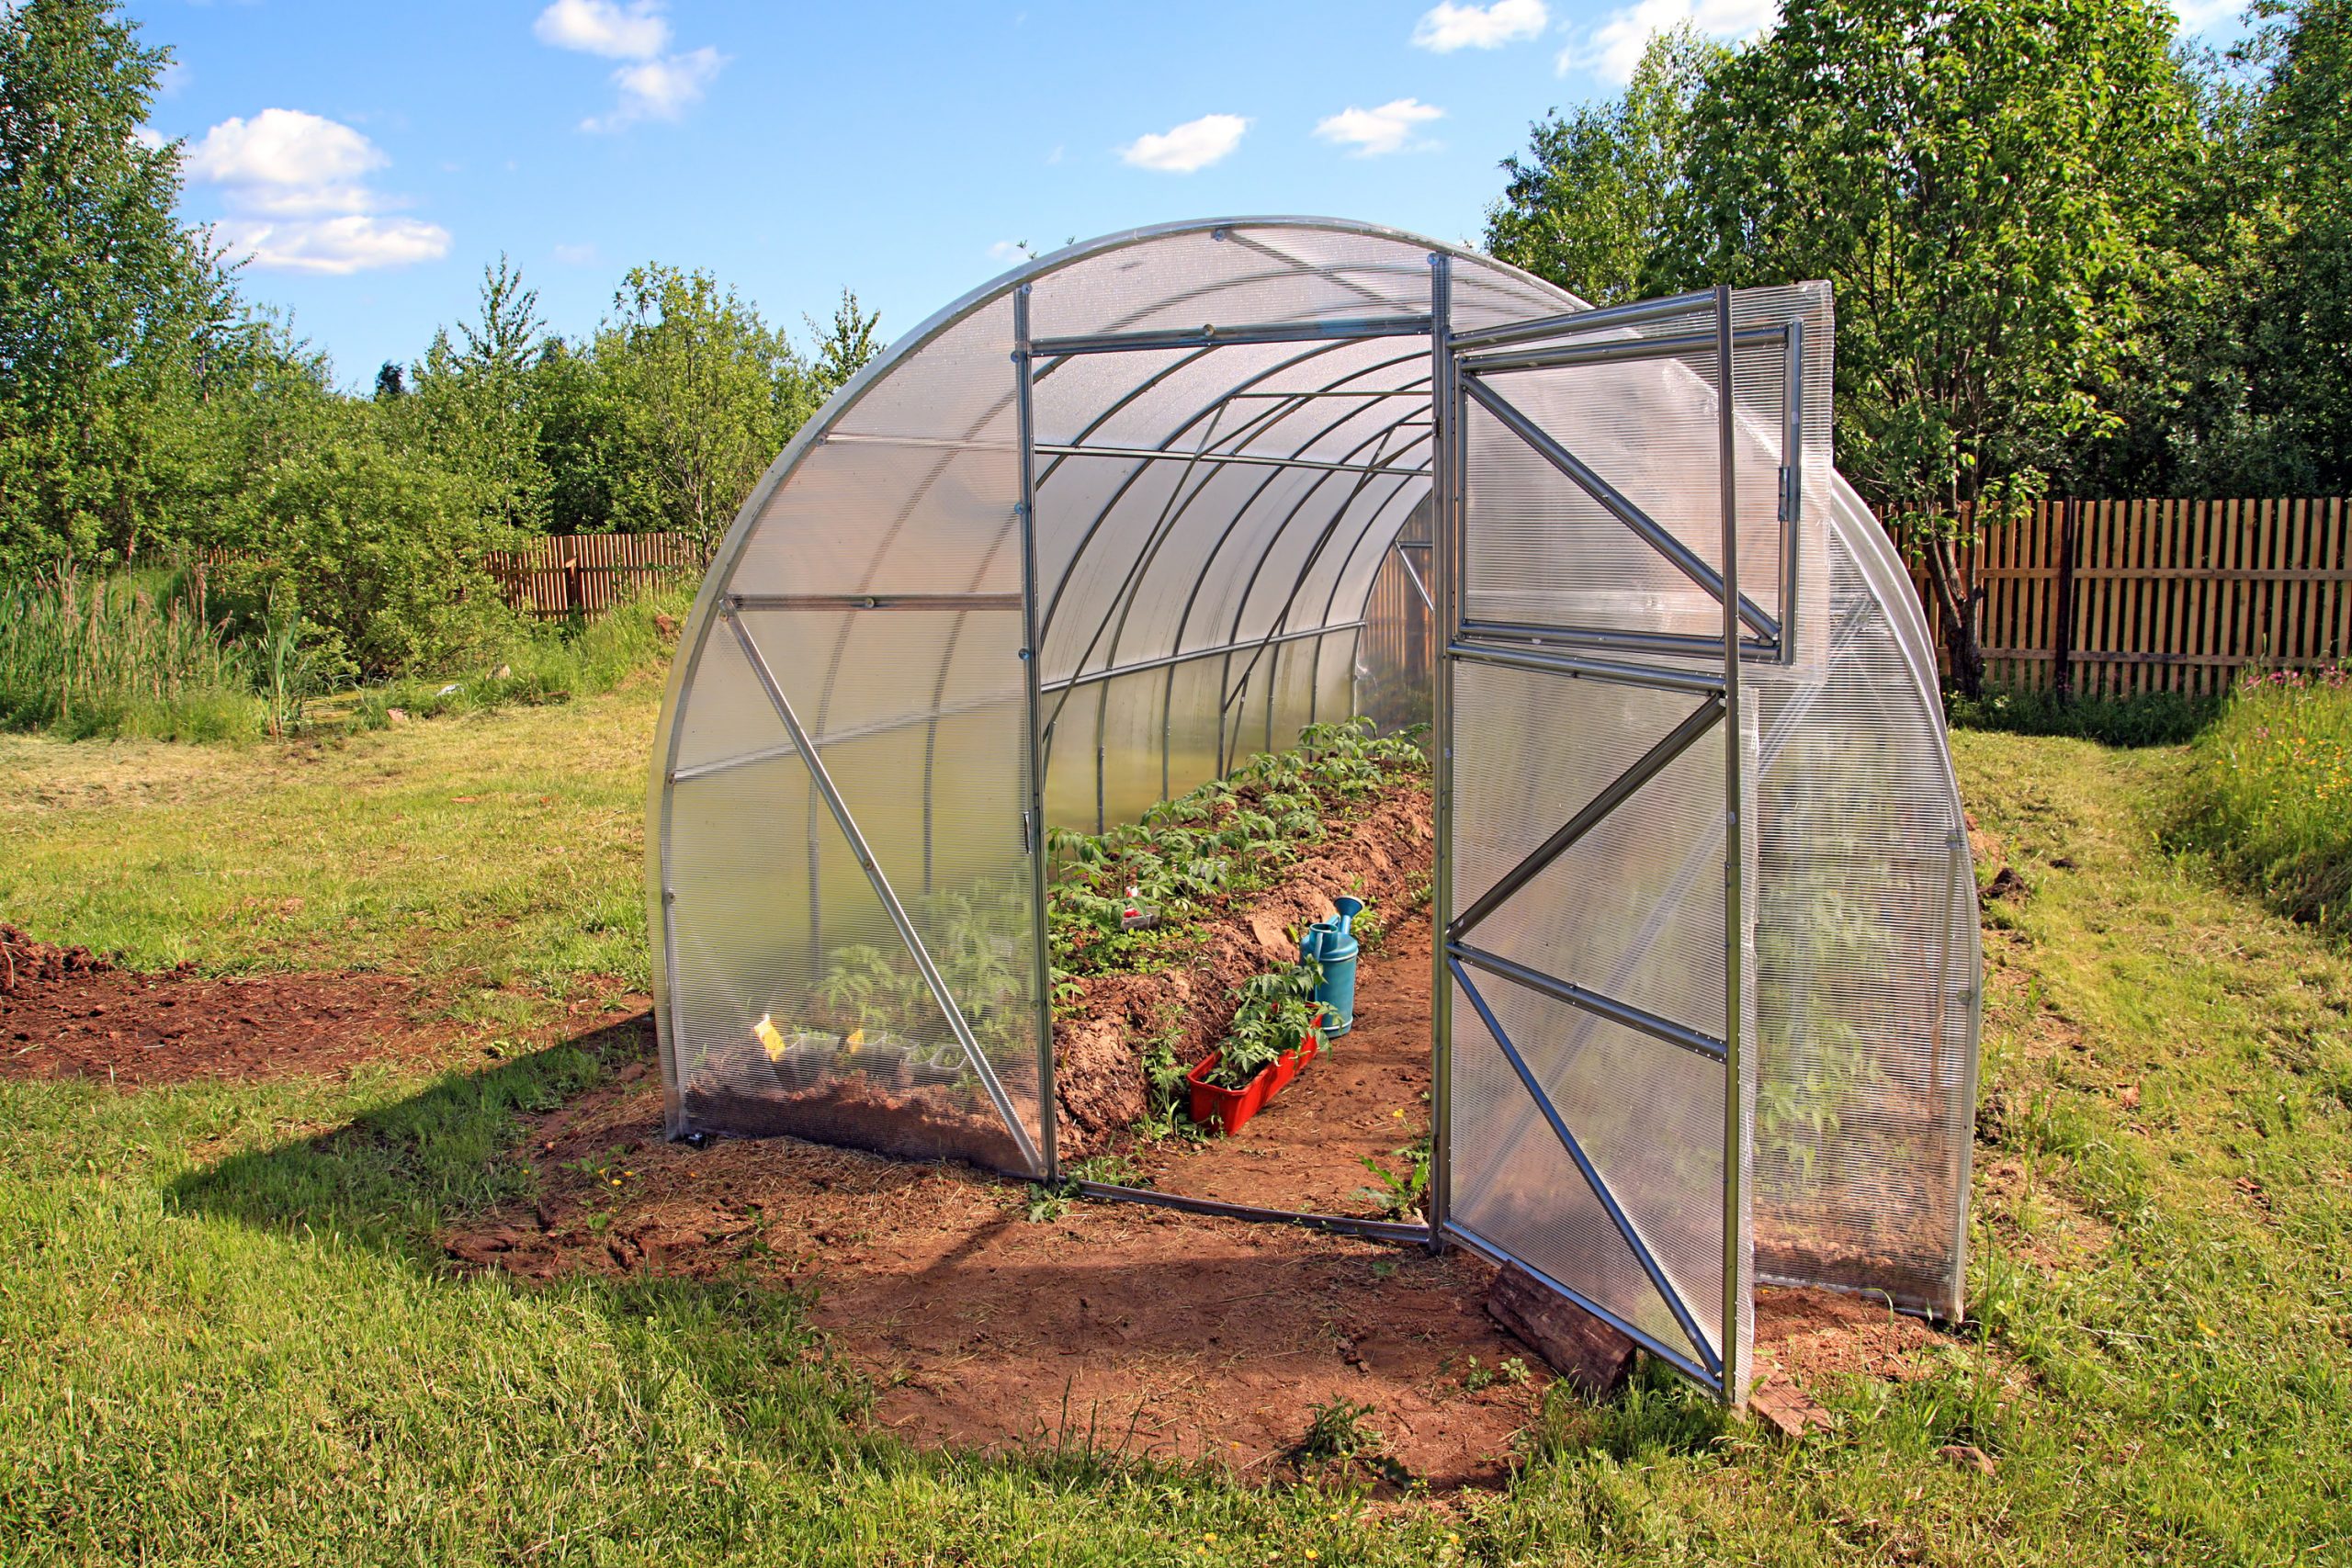 HOOP HOUSE PLANS FREE: The Best You'll Find On The Internet